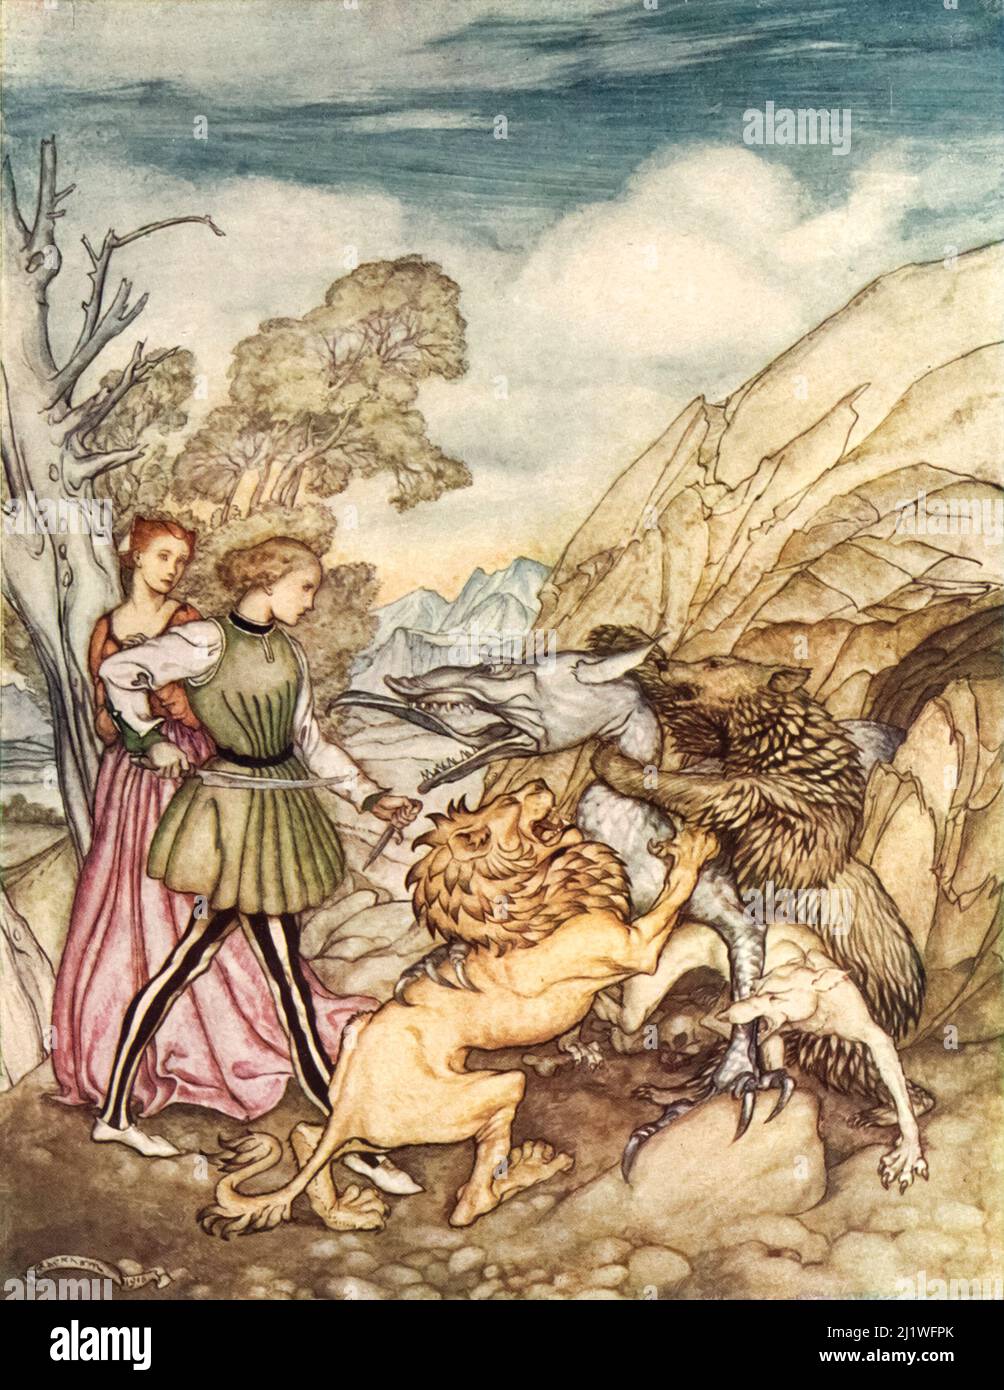 So valiantly did they grapple with him that they bore him to the ground and slew him from Cesarino and the Dragon' (Italian) from the book ' The Allies fairy book ' illustrated by Arthur Rackham Publication date 1916 Publisher J. B. Lippencott co. he Allies' Fairy Book contains a selection of traditional fairy tales from the allied countries participating in World War I. Its stories include; 'Jack the Giant Killer' (English); 'The Battle of the Birds' (Scottish); 'Lludd and Llevelys' (Welsh); 'Gulesh' (Irish); 'The Sleeping Beauty (French); 'Cesarino and the Dragon' (Italian); 'What came of pi Stock Photo